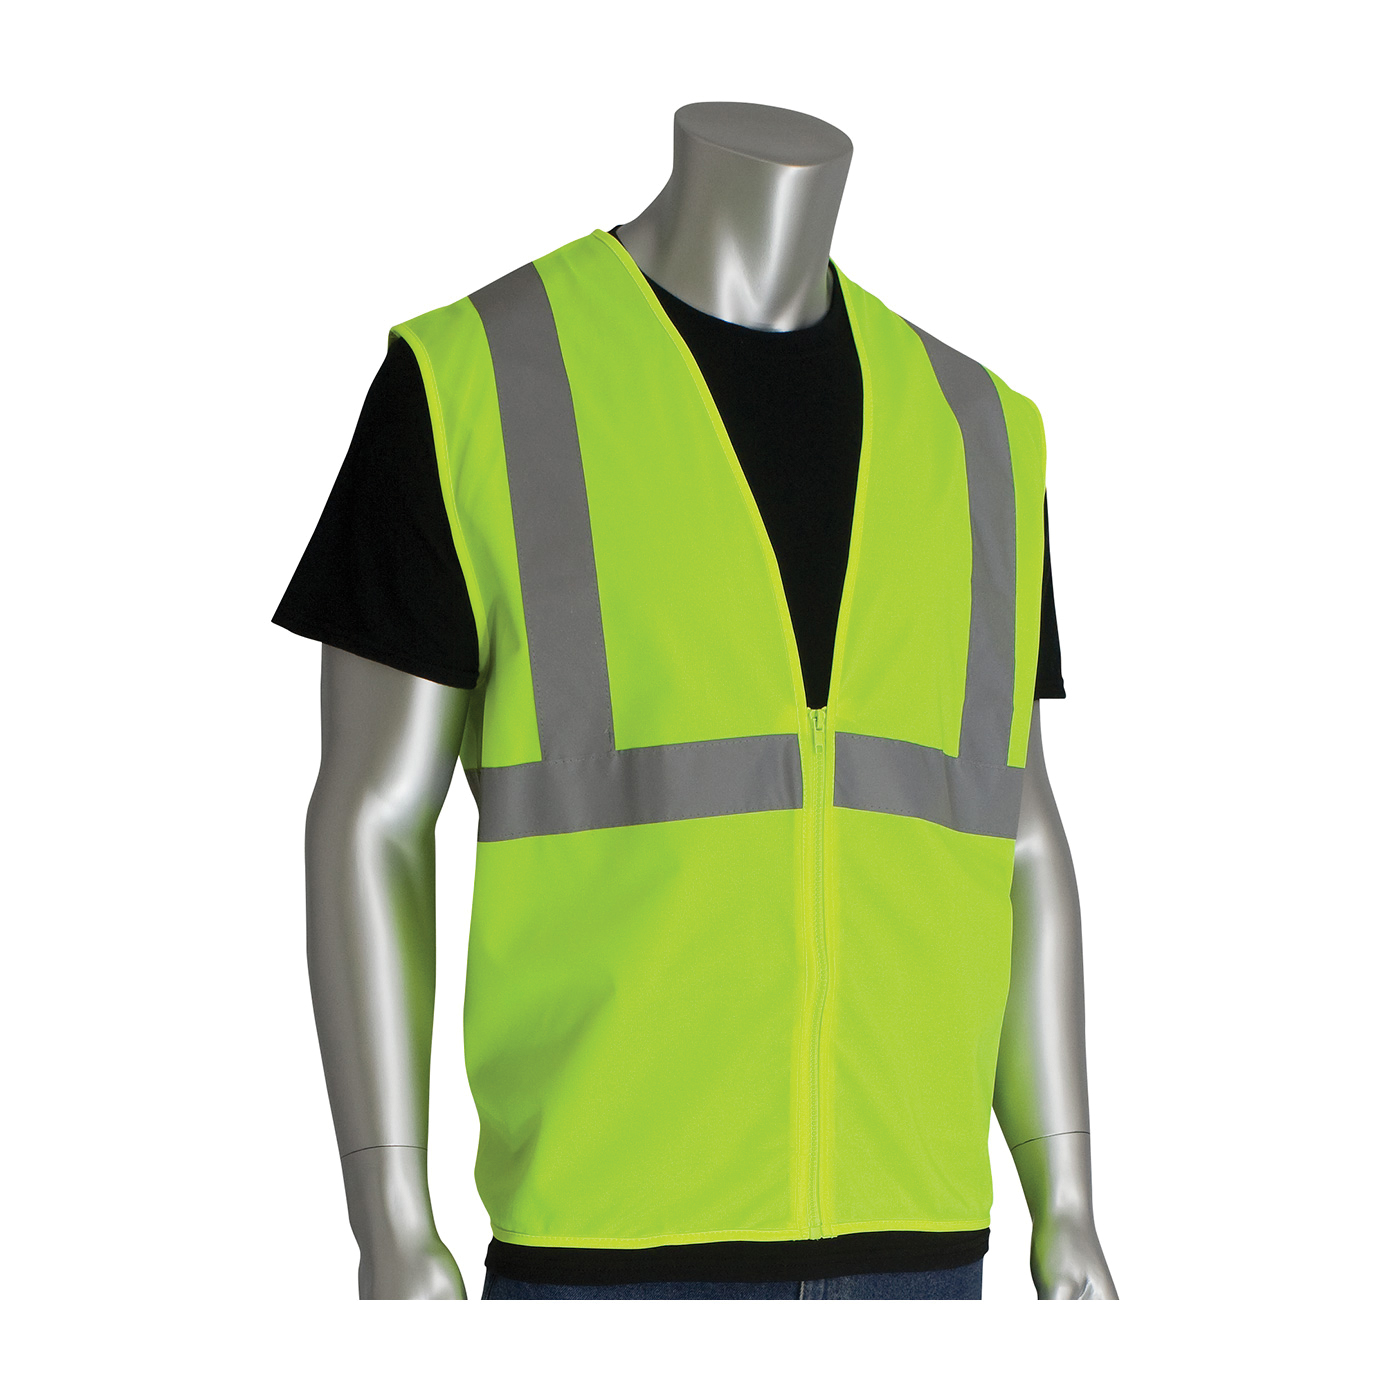 PIP® 302-WCENGZLY-5X Standard Solid Vest, 5XL, Hi-Viz Lime Yellow, Polyester Mesh, Zipper Closure, ANSI Class: Class 2, Specifications Met: ANSI 107 Type R Class 2